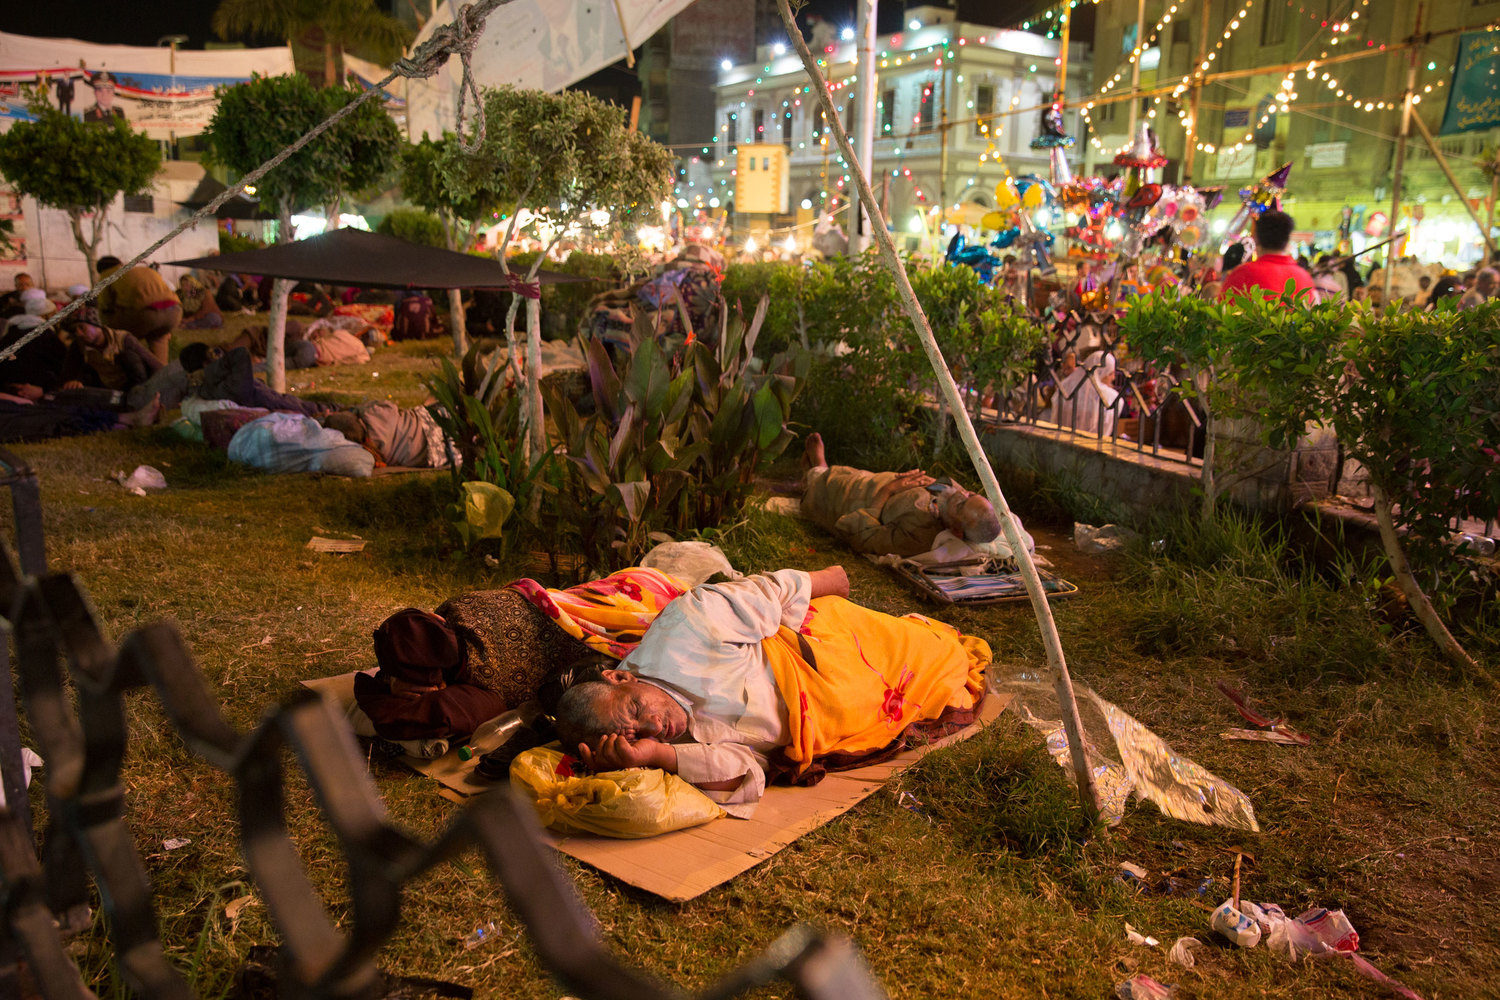  An elderly couple sleeps in a small park surrounded by the Sayeda Zeinab moulid festivities. The festival brings thousands of people from all over the country who often live and sleep in the neighborhood streets during the entire festival. 